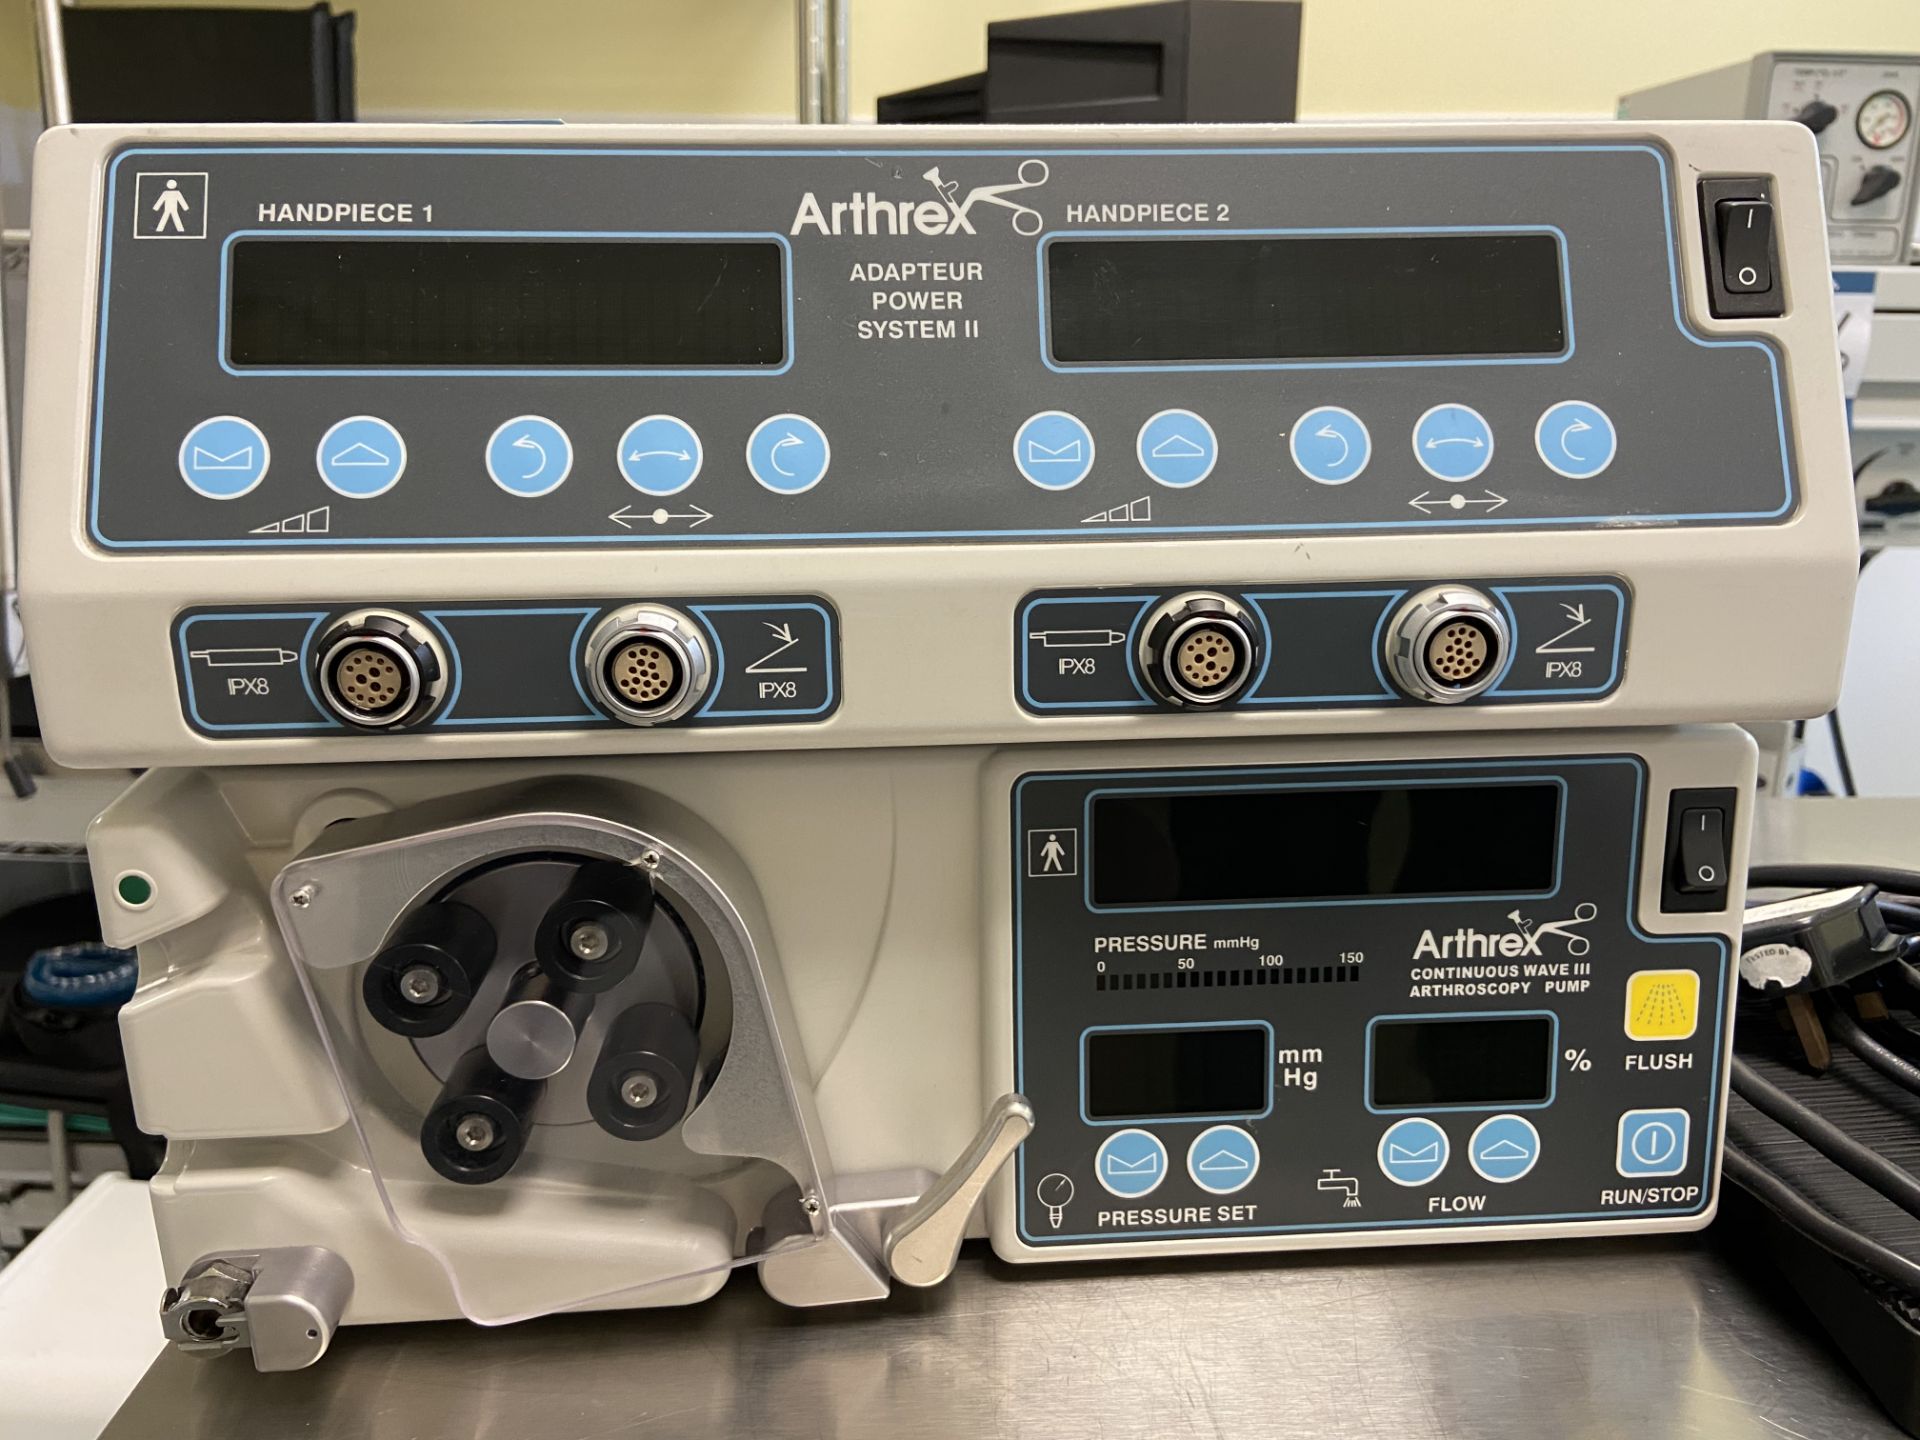 Arthrex REF AR-8300/ AR- 6475 continuous wave III arthroscope pump with adapter power system II. S/ - Image 2 of 2